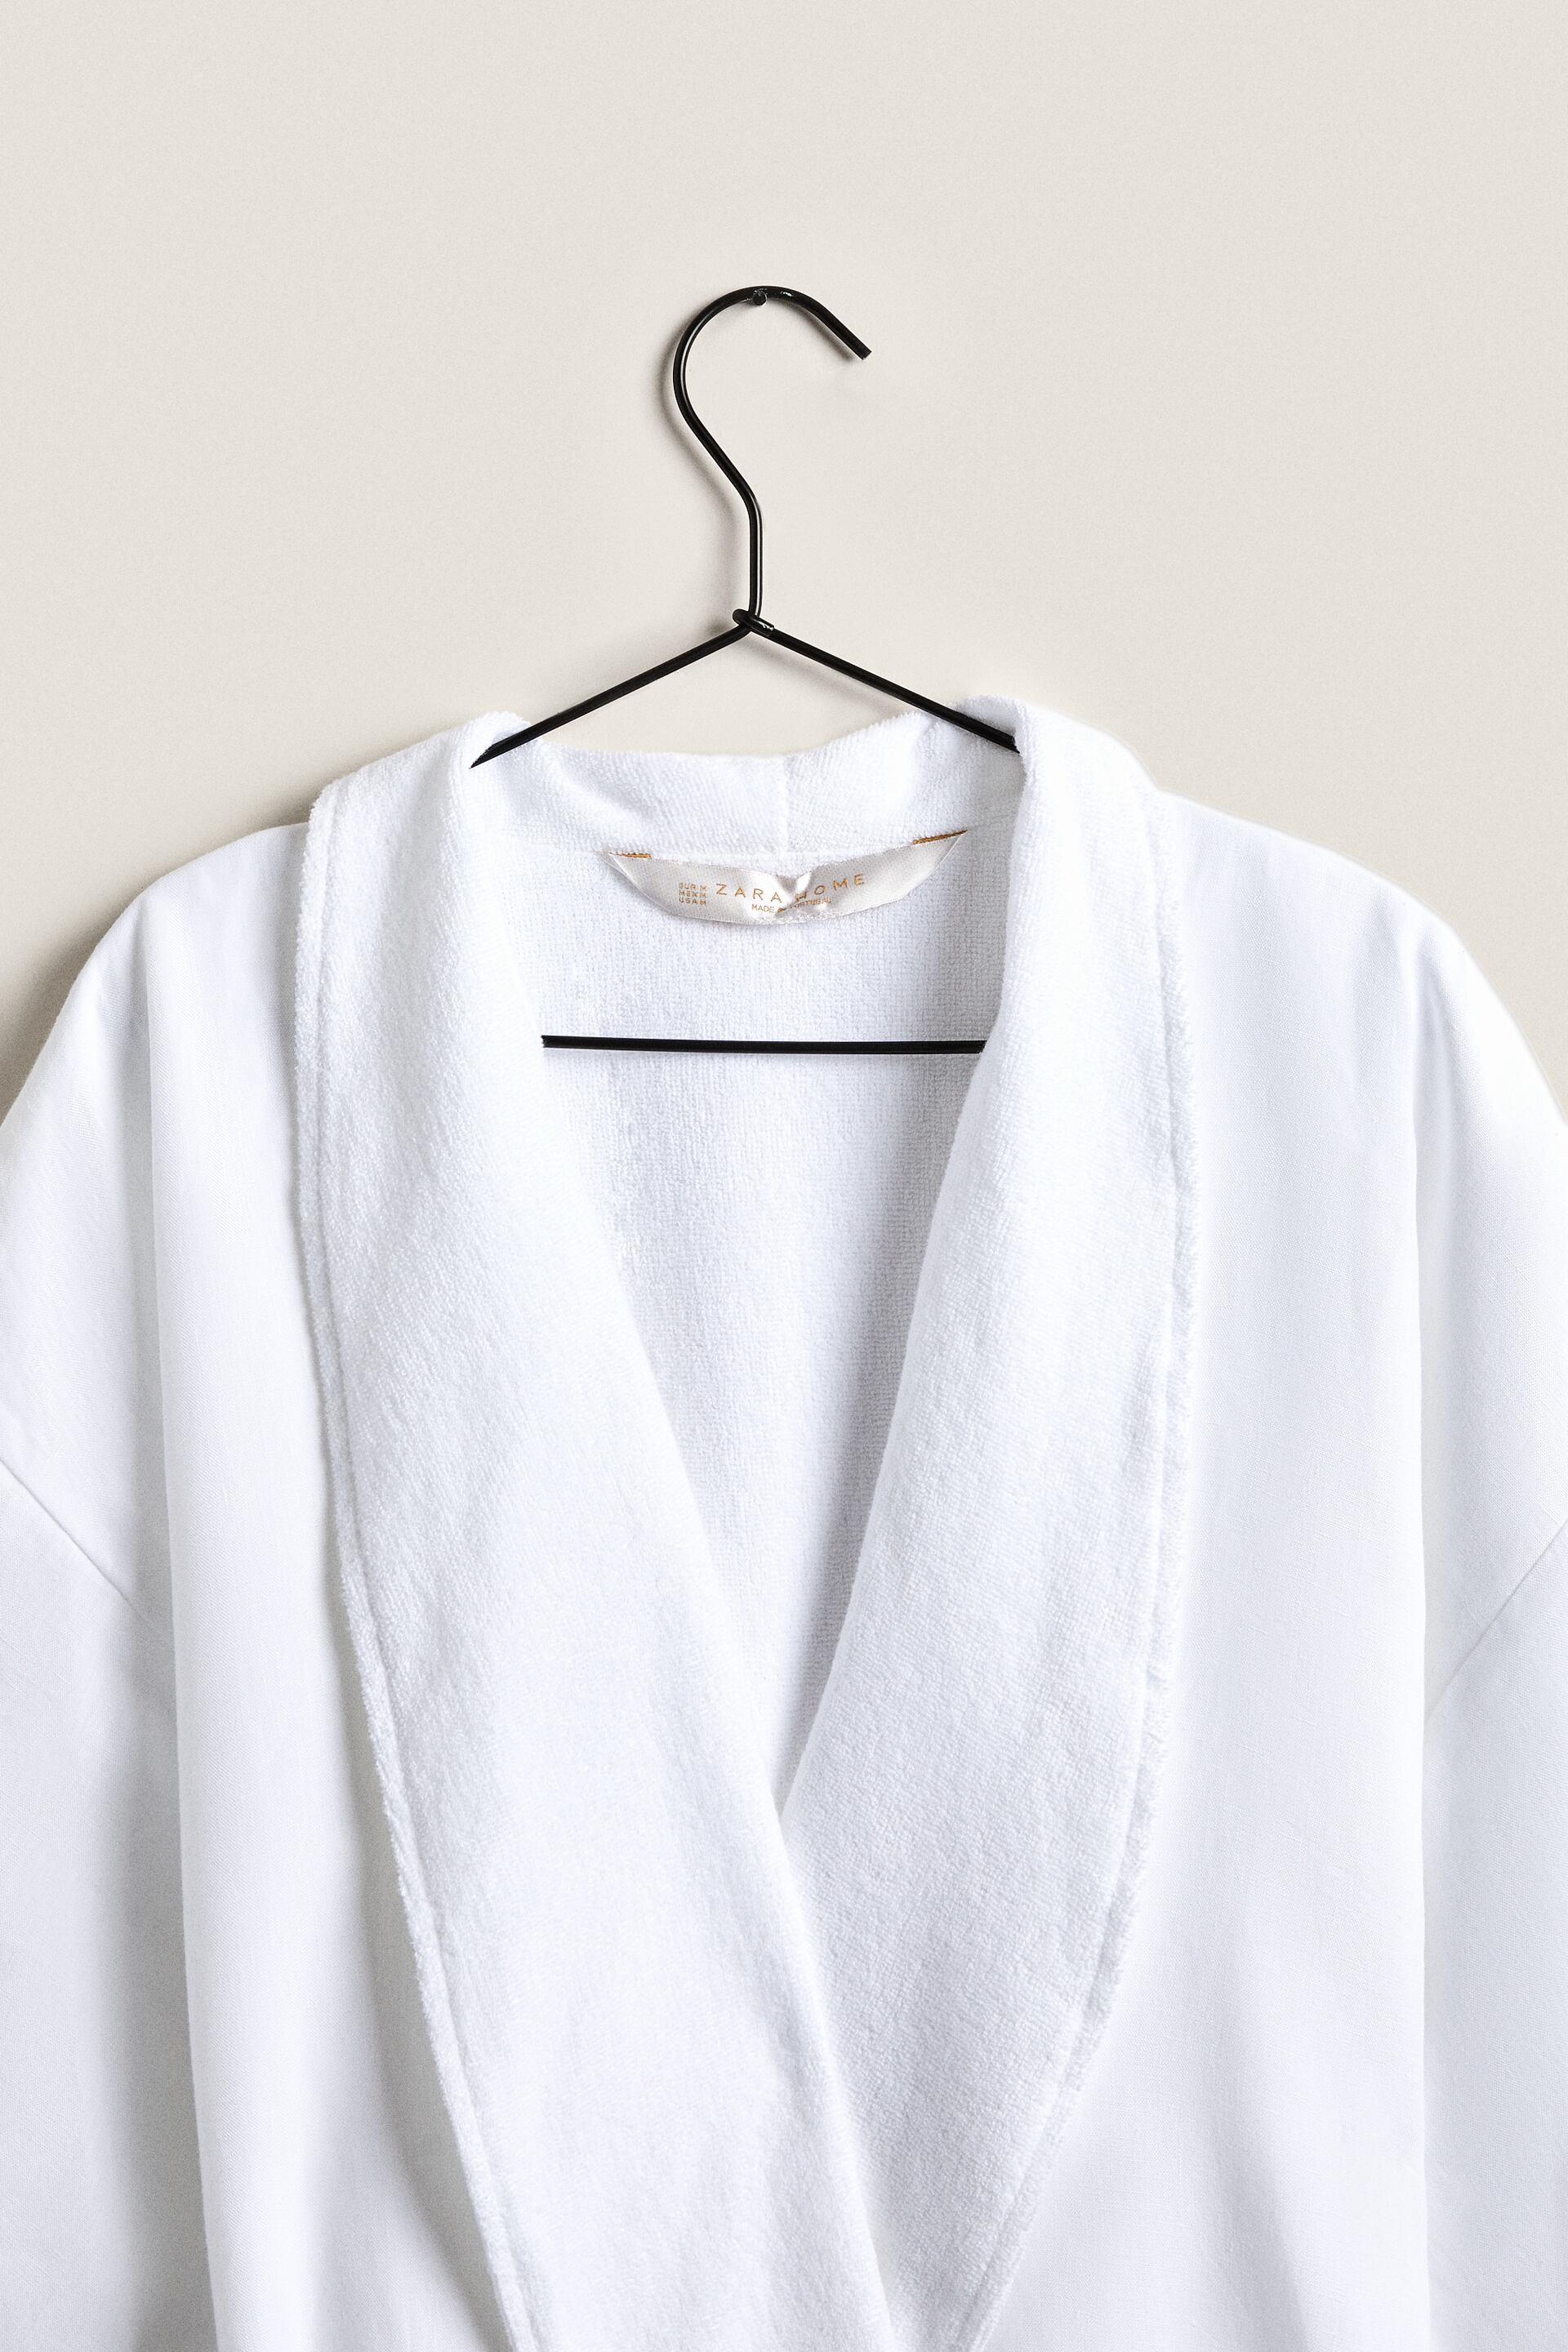 GOWN | TERRY DRESSING WASHED United ZARA States White LINEN -